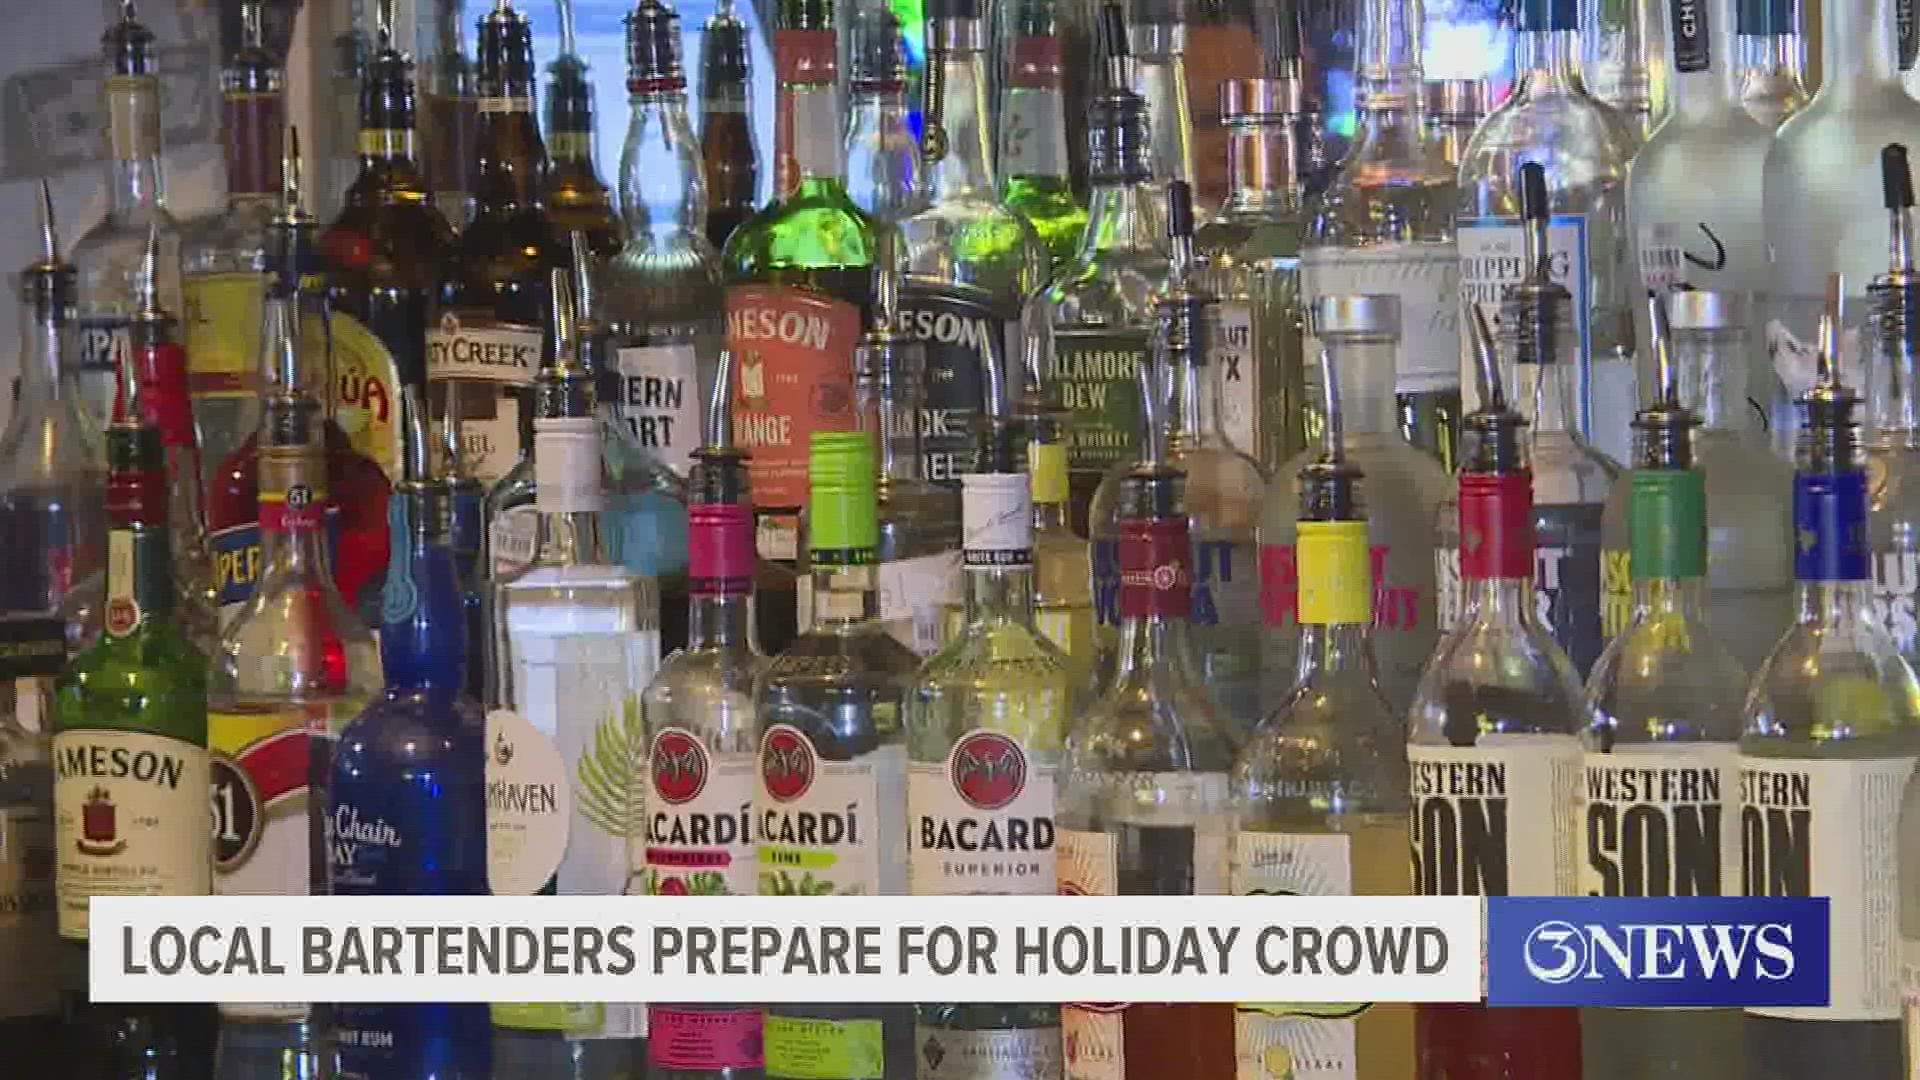 The Goldfish Bar head bartender Michael Cantu said he hopes residents are drinking responsibly.